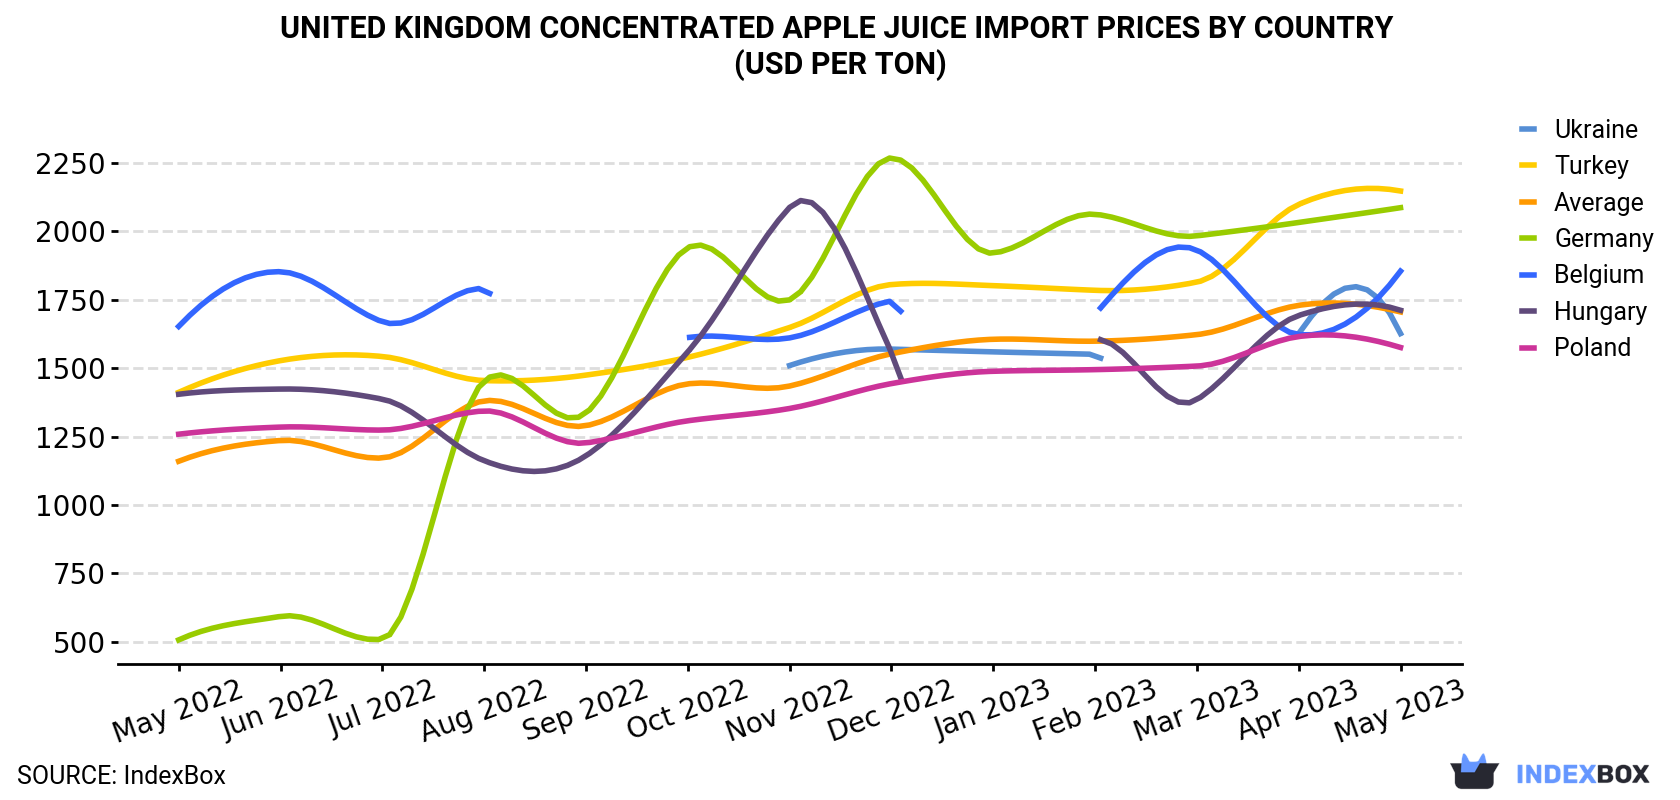 United Kingdom Concentrated Apple Juice Import Prices By Country (USD Per Ton)